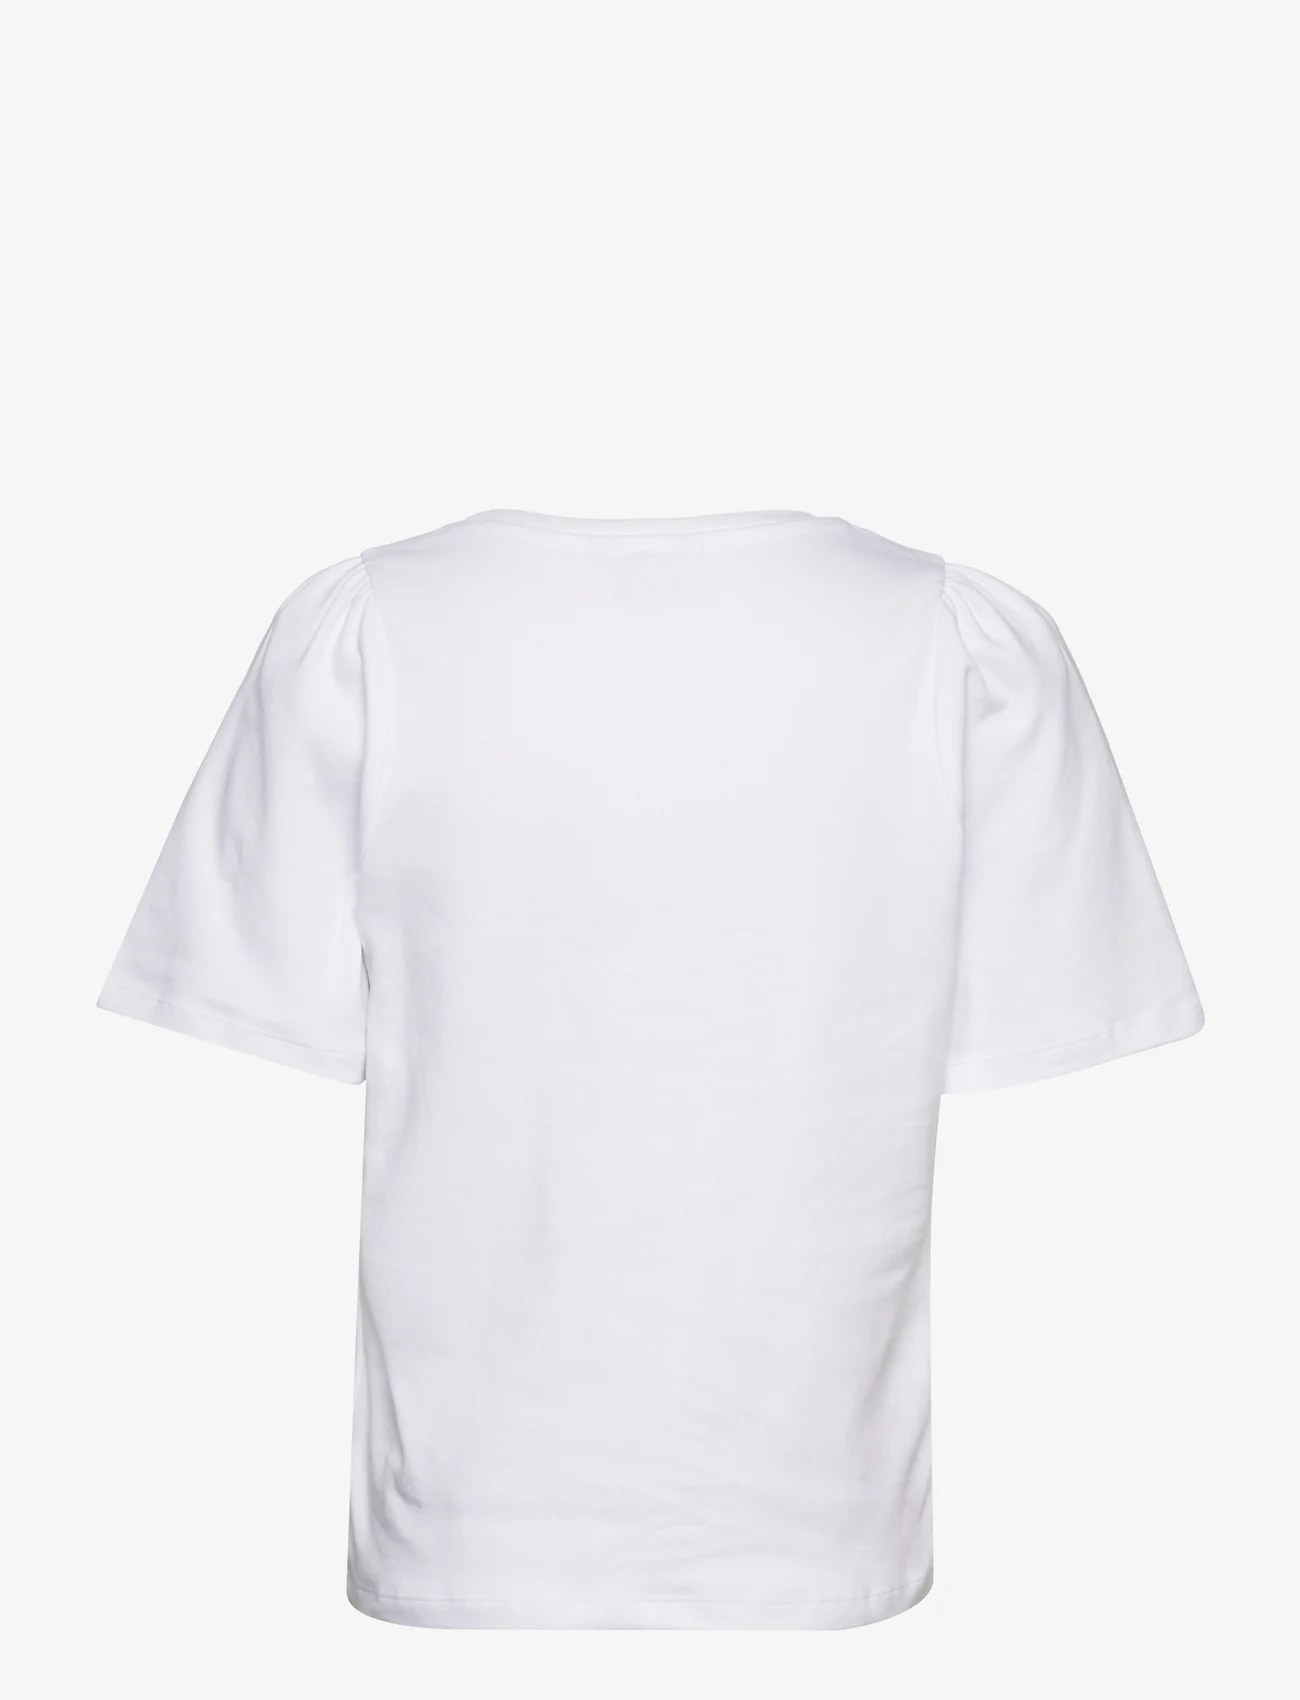 Part Two - ImaleaPW TS - lowest prices - bright white - 1